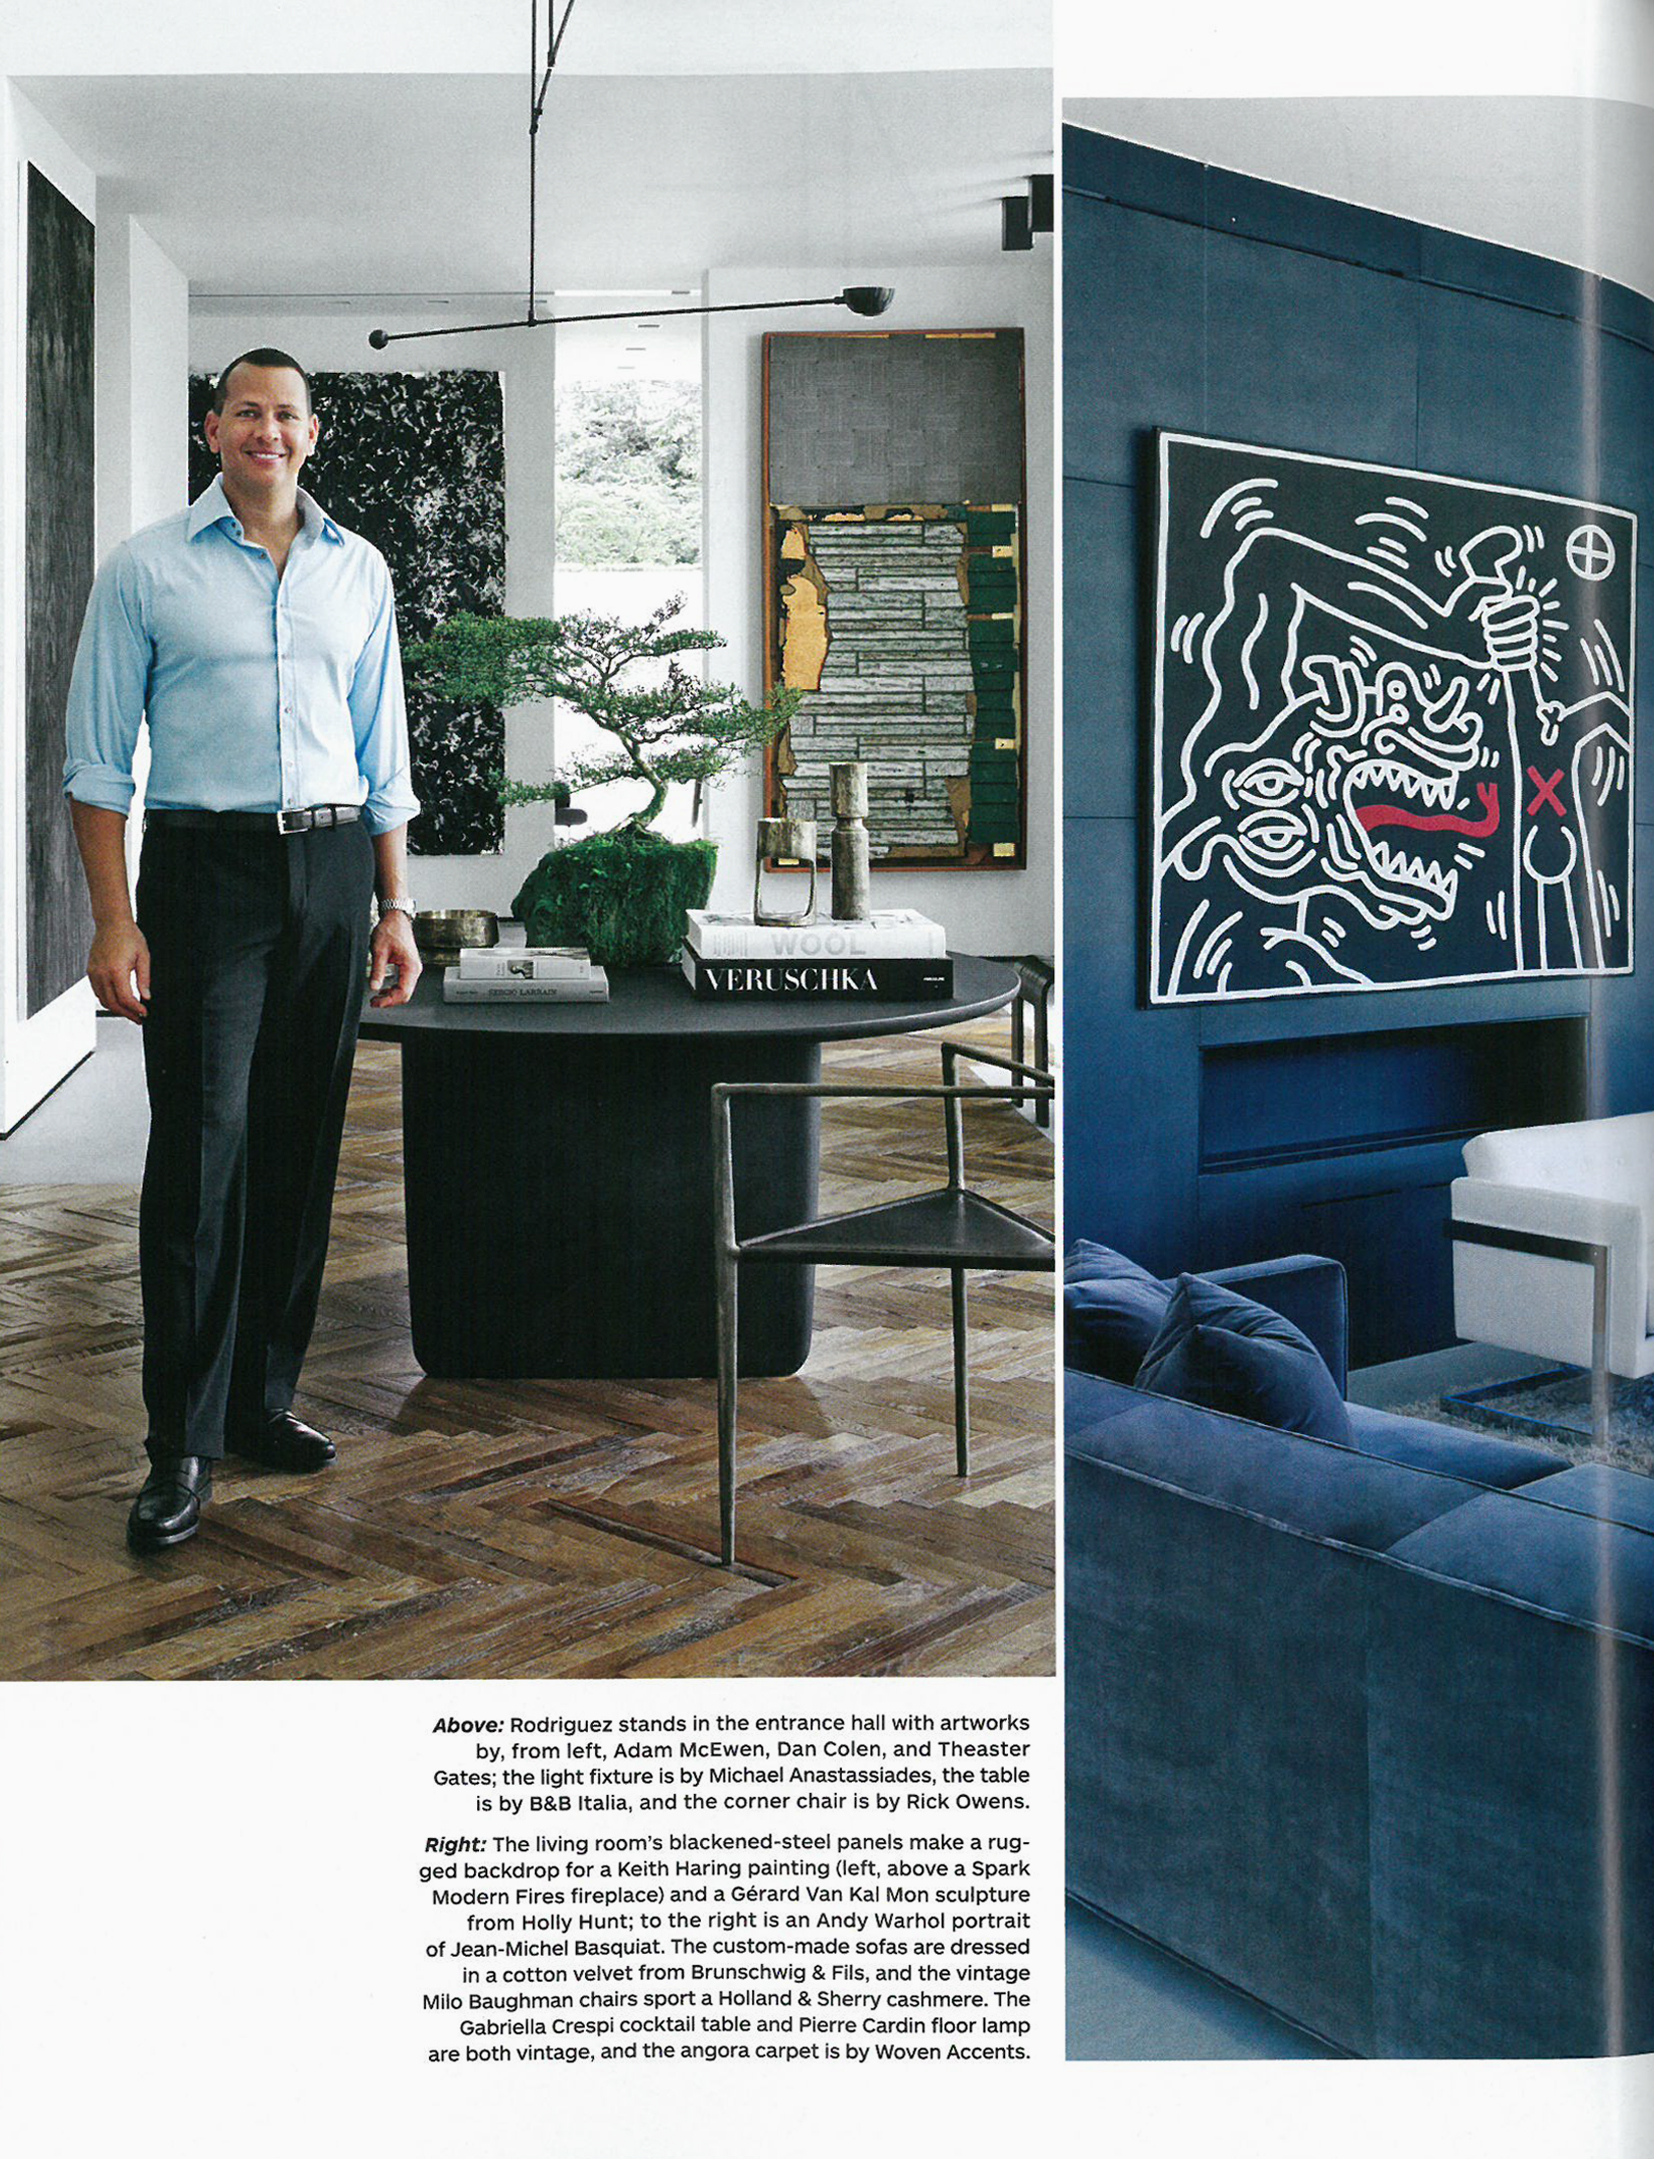 Architectural Digest article featuring the Tobi-Ishi Table from B&B Italia